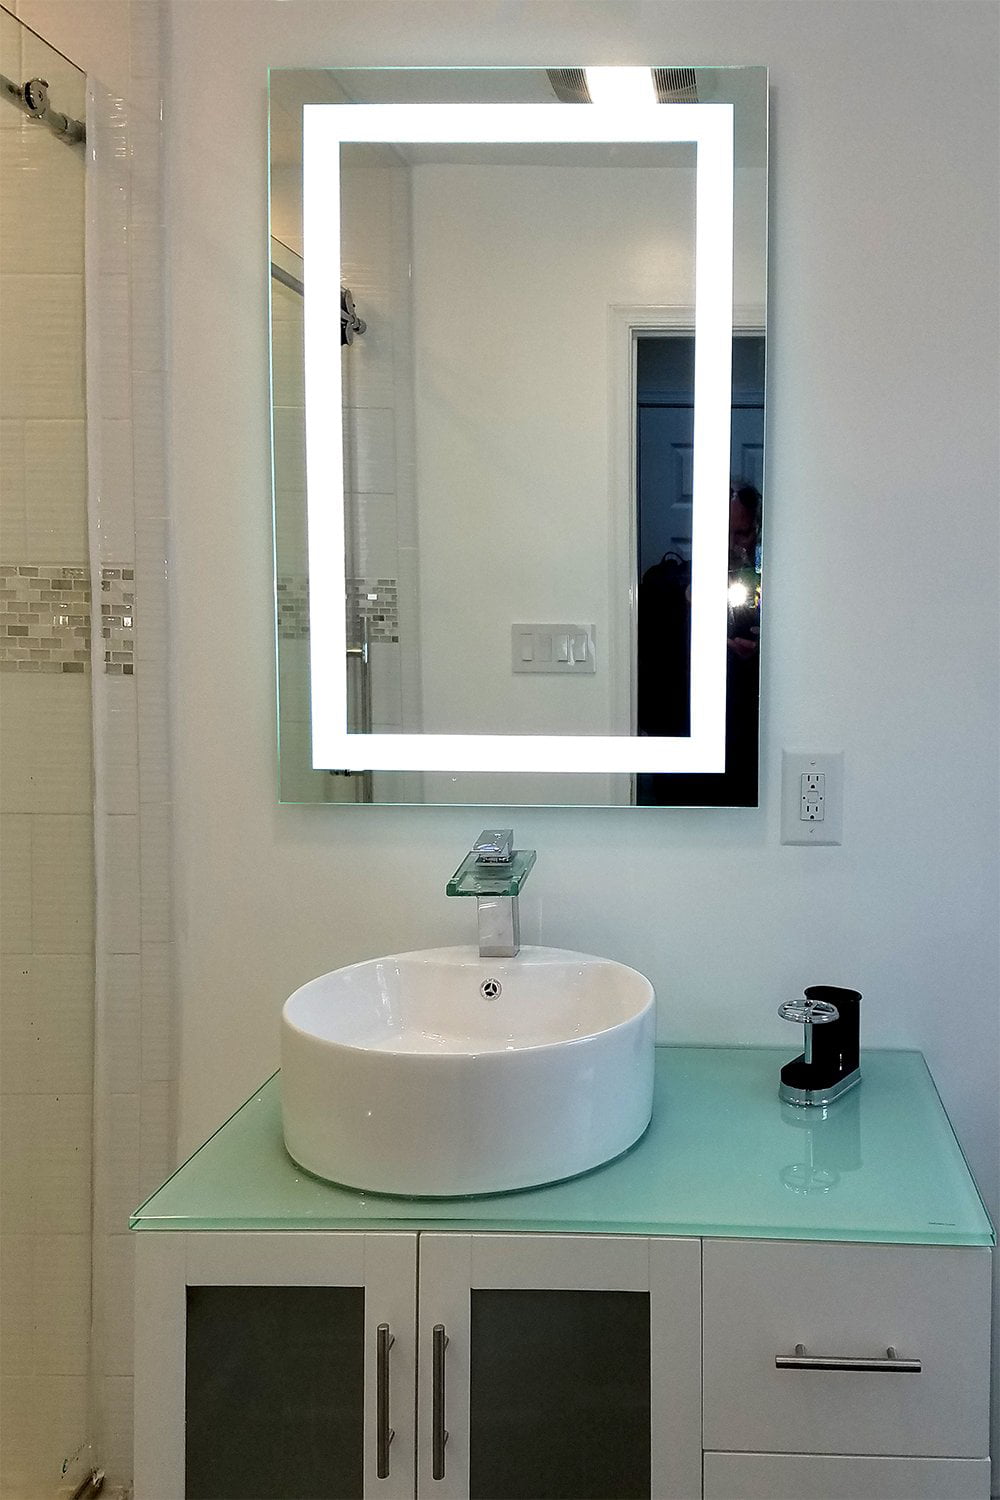 Wall Mounted Lighted Vanity Mirror LED MAM84848 Commercial Grade 48x48